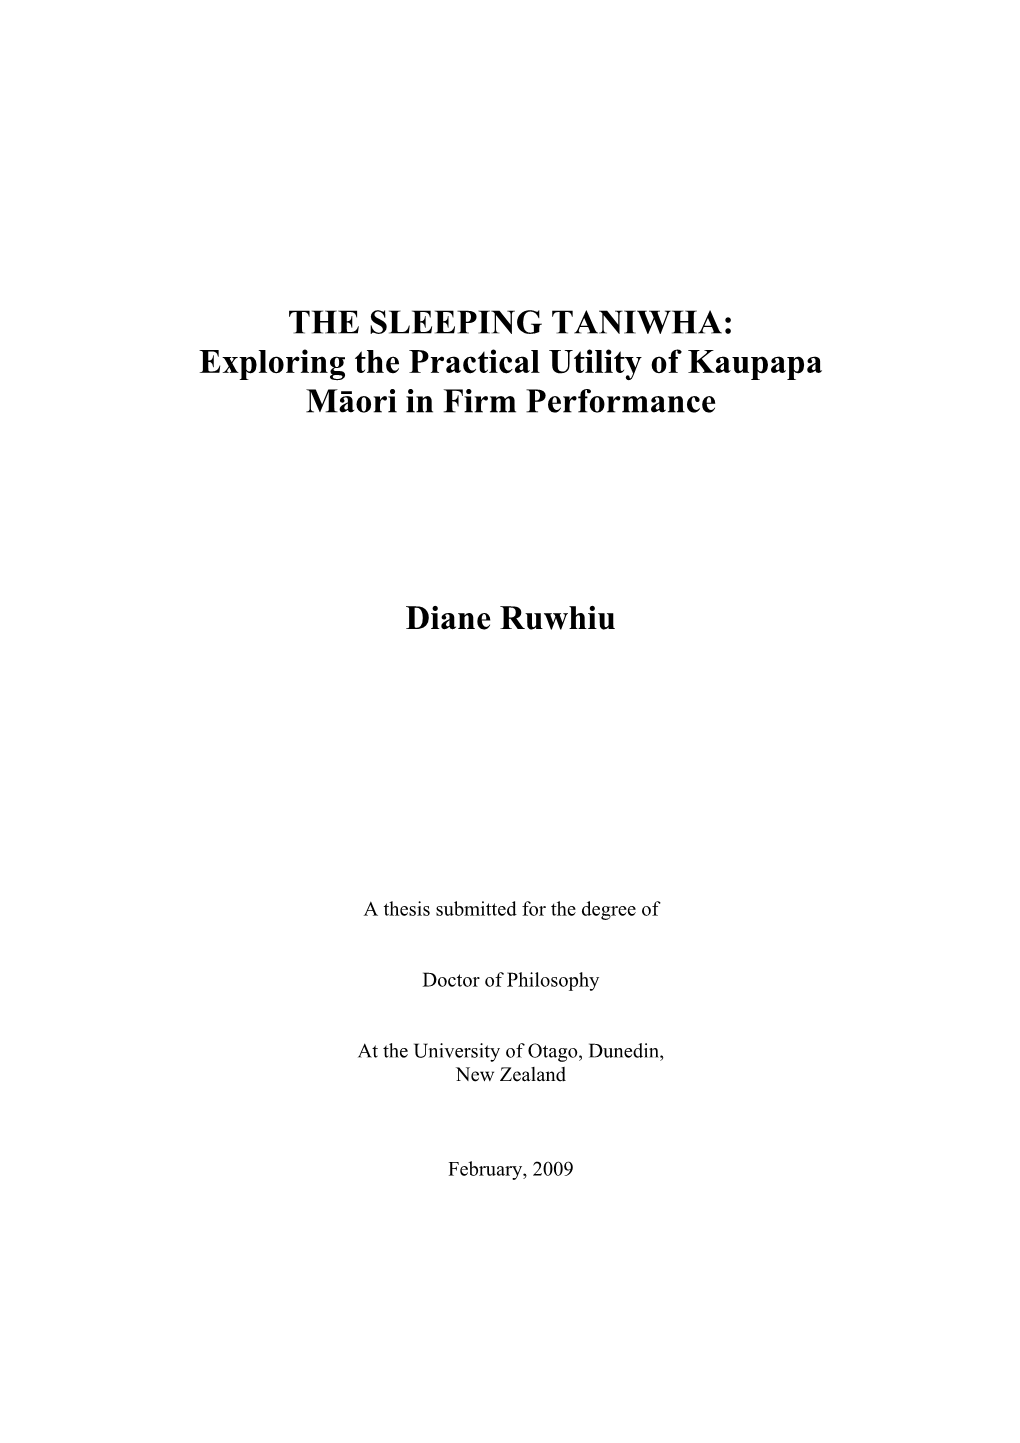 Exploring the Practical Utility of Kaupapa Māori in Firm Performance